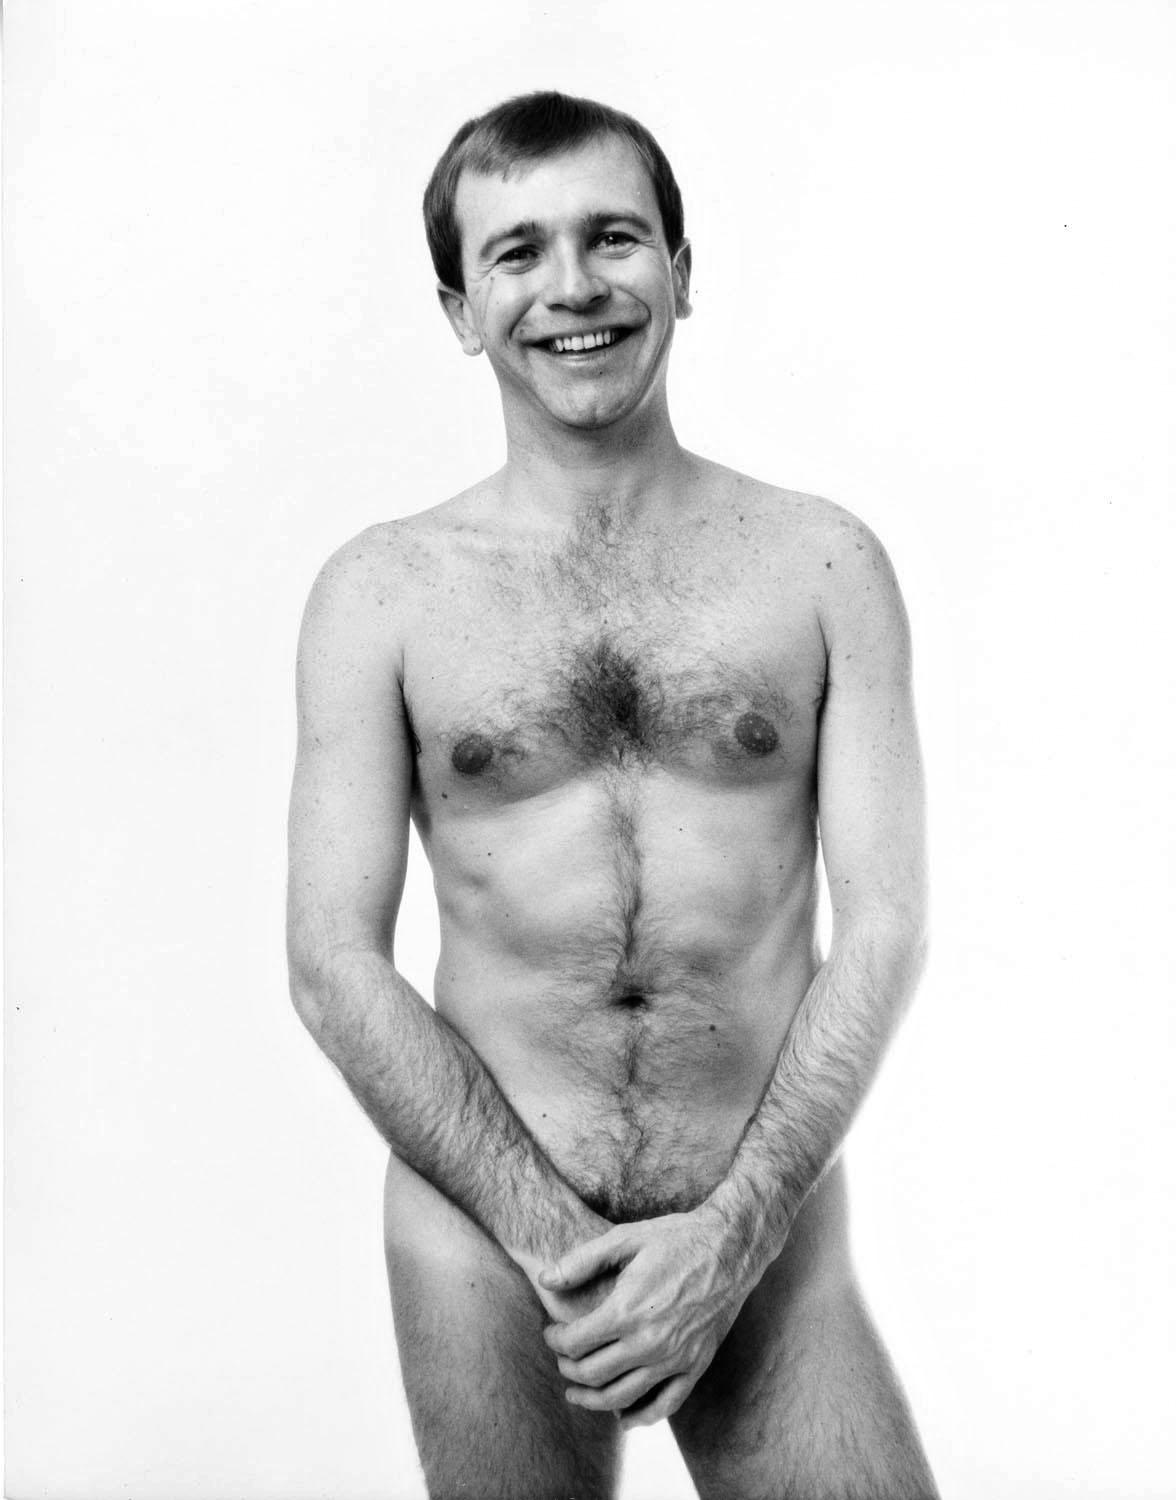  Tony award-winning playwright Terrence McNally photographed nude for After Dark